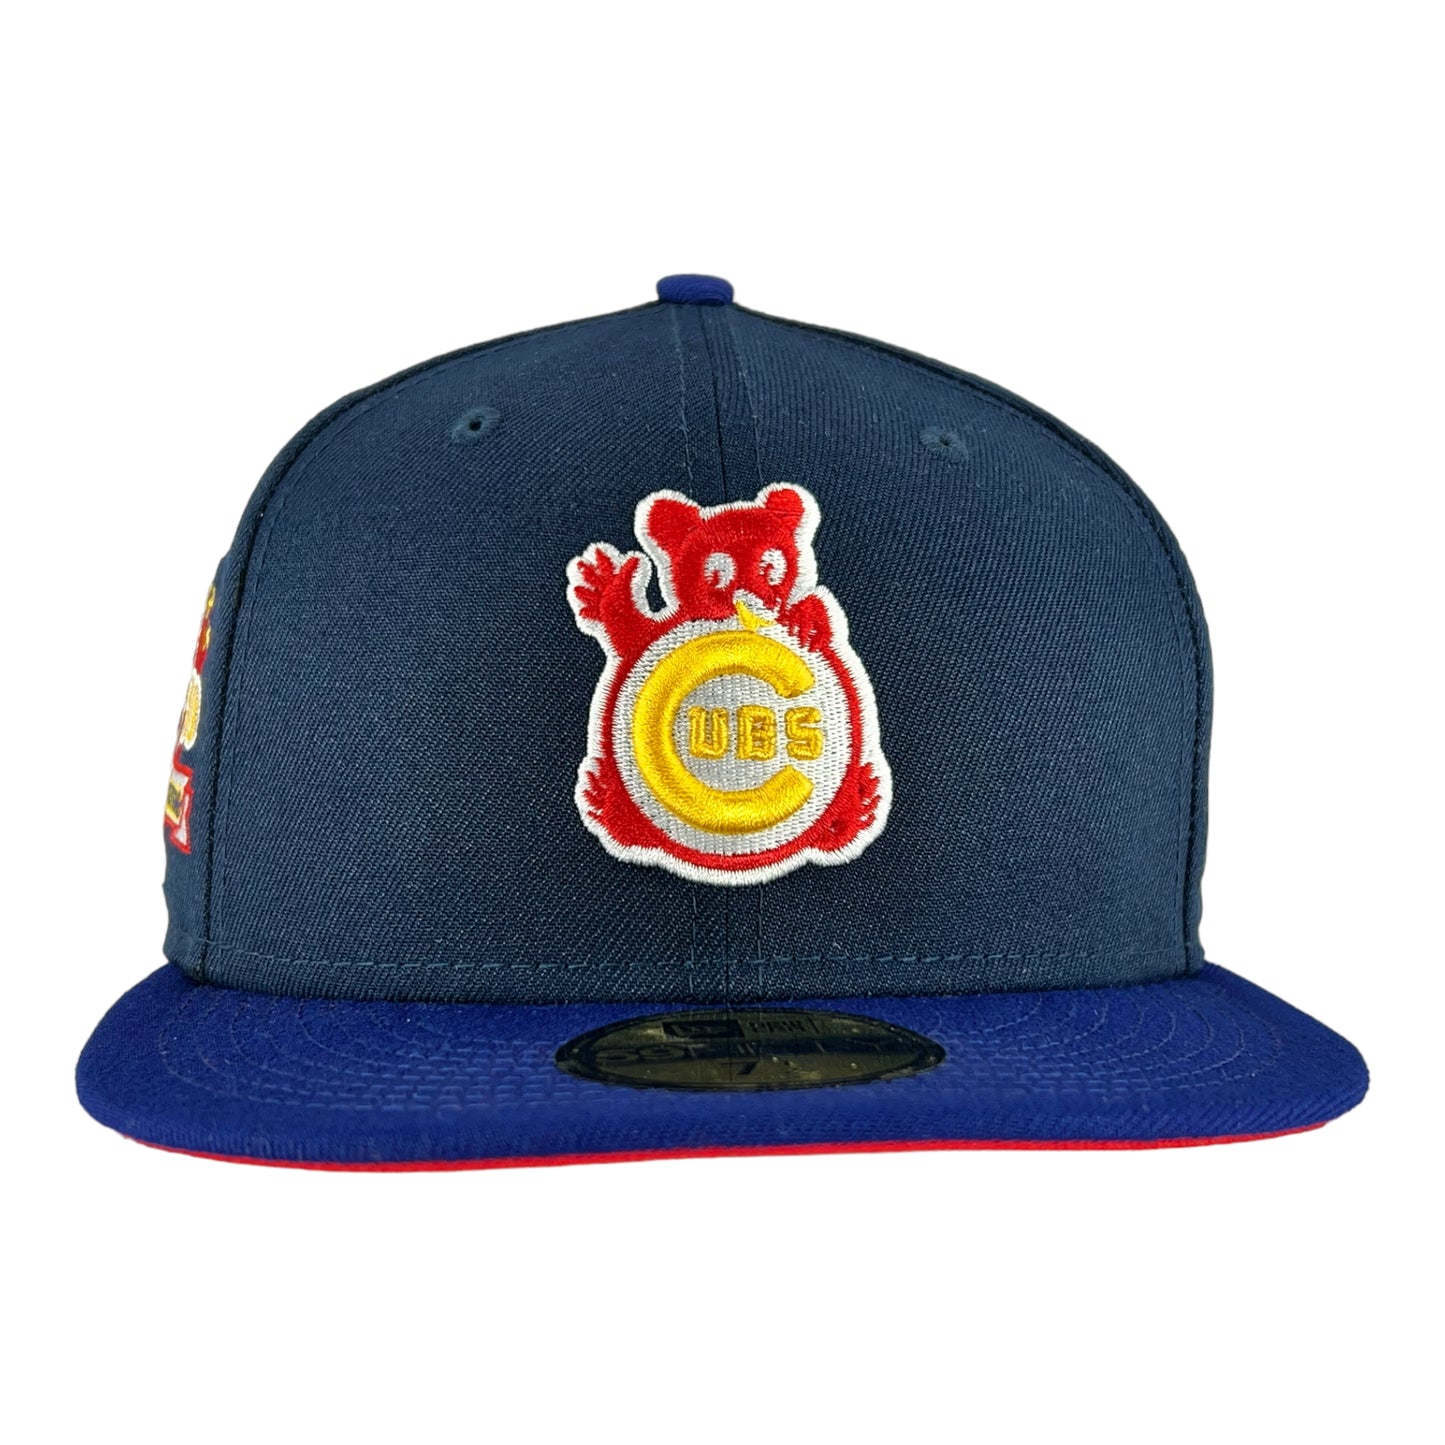 Chicago Cubs Oceanside Blue/Scarlet Waving Bear 1990 ASG New Era 59FIFTY Fitted Hat